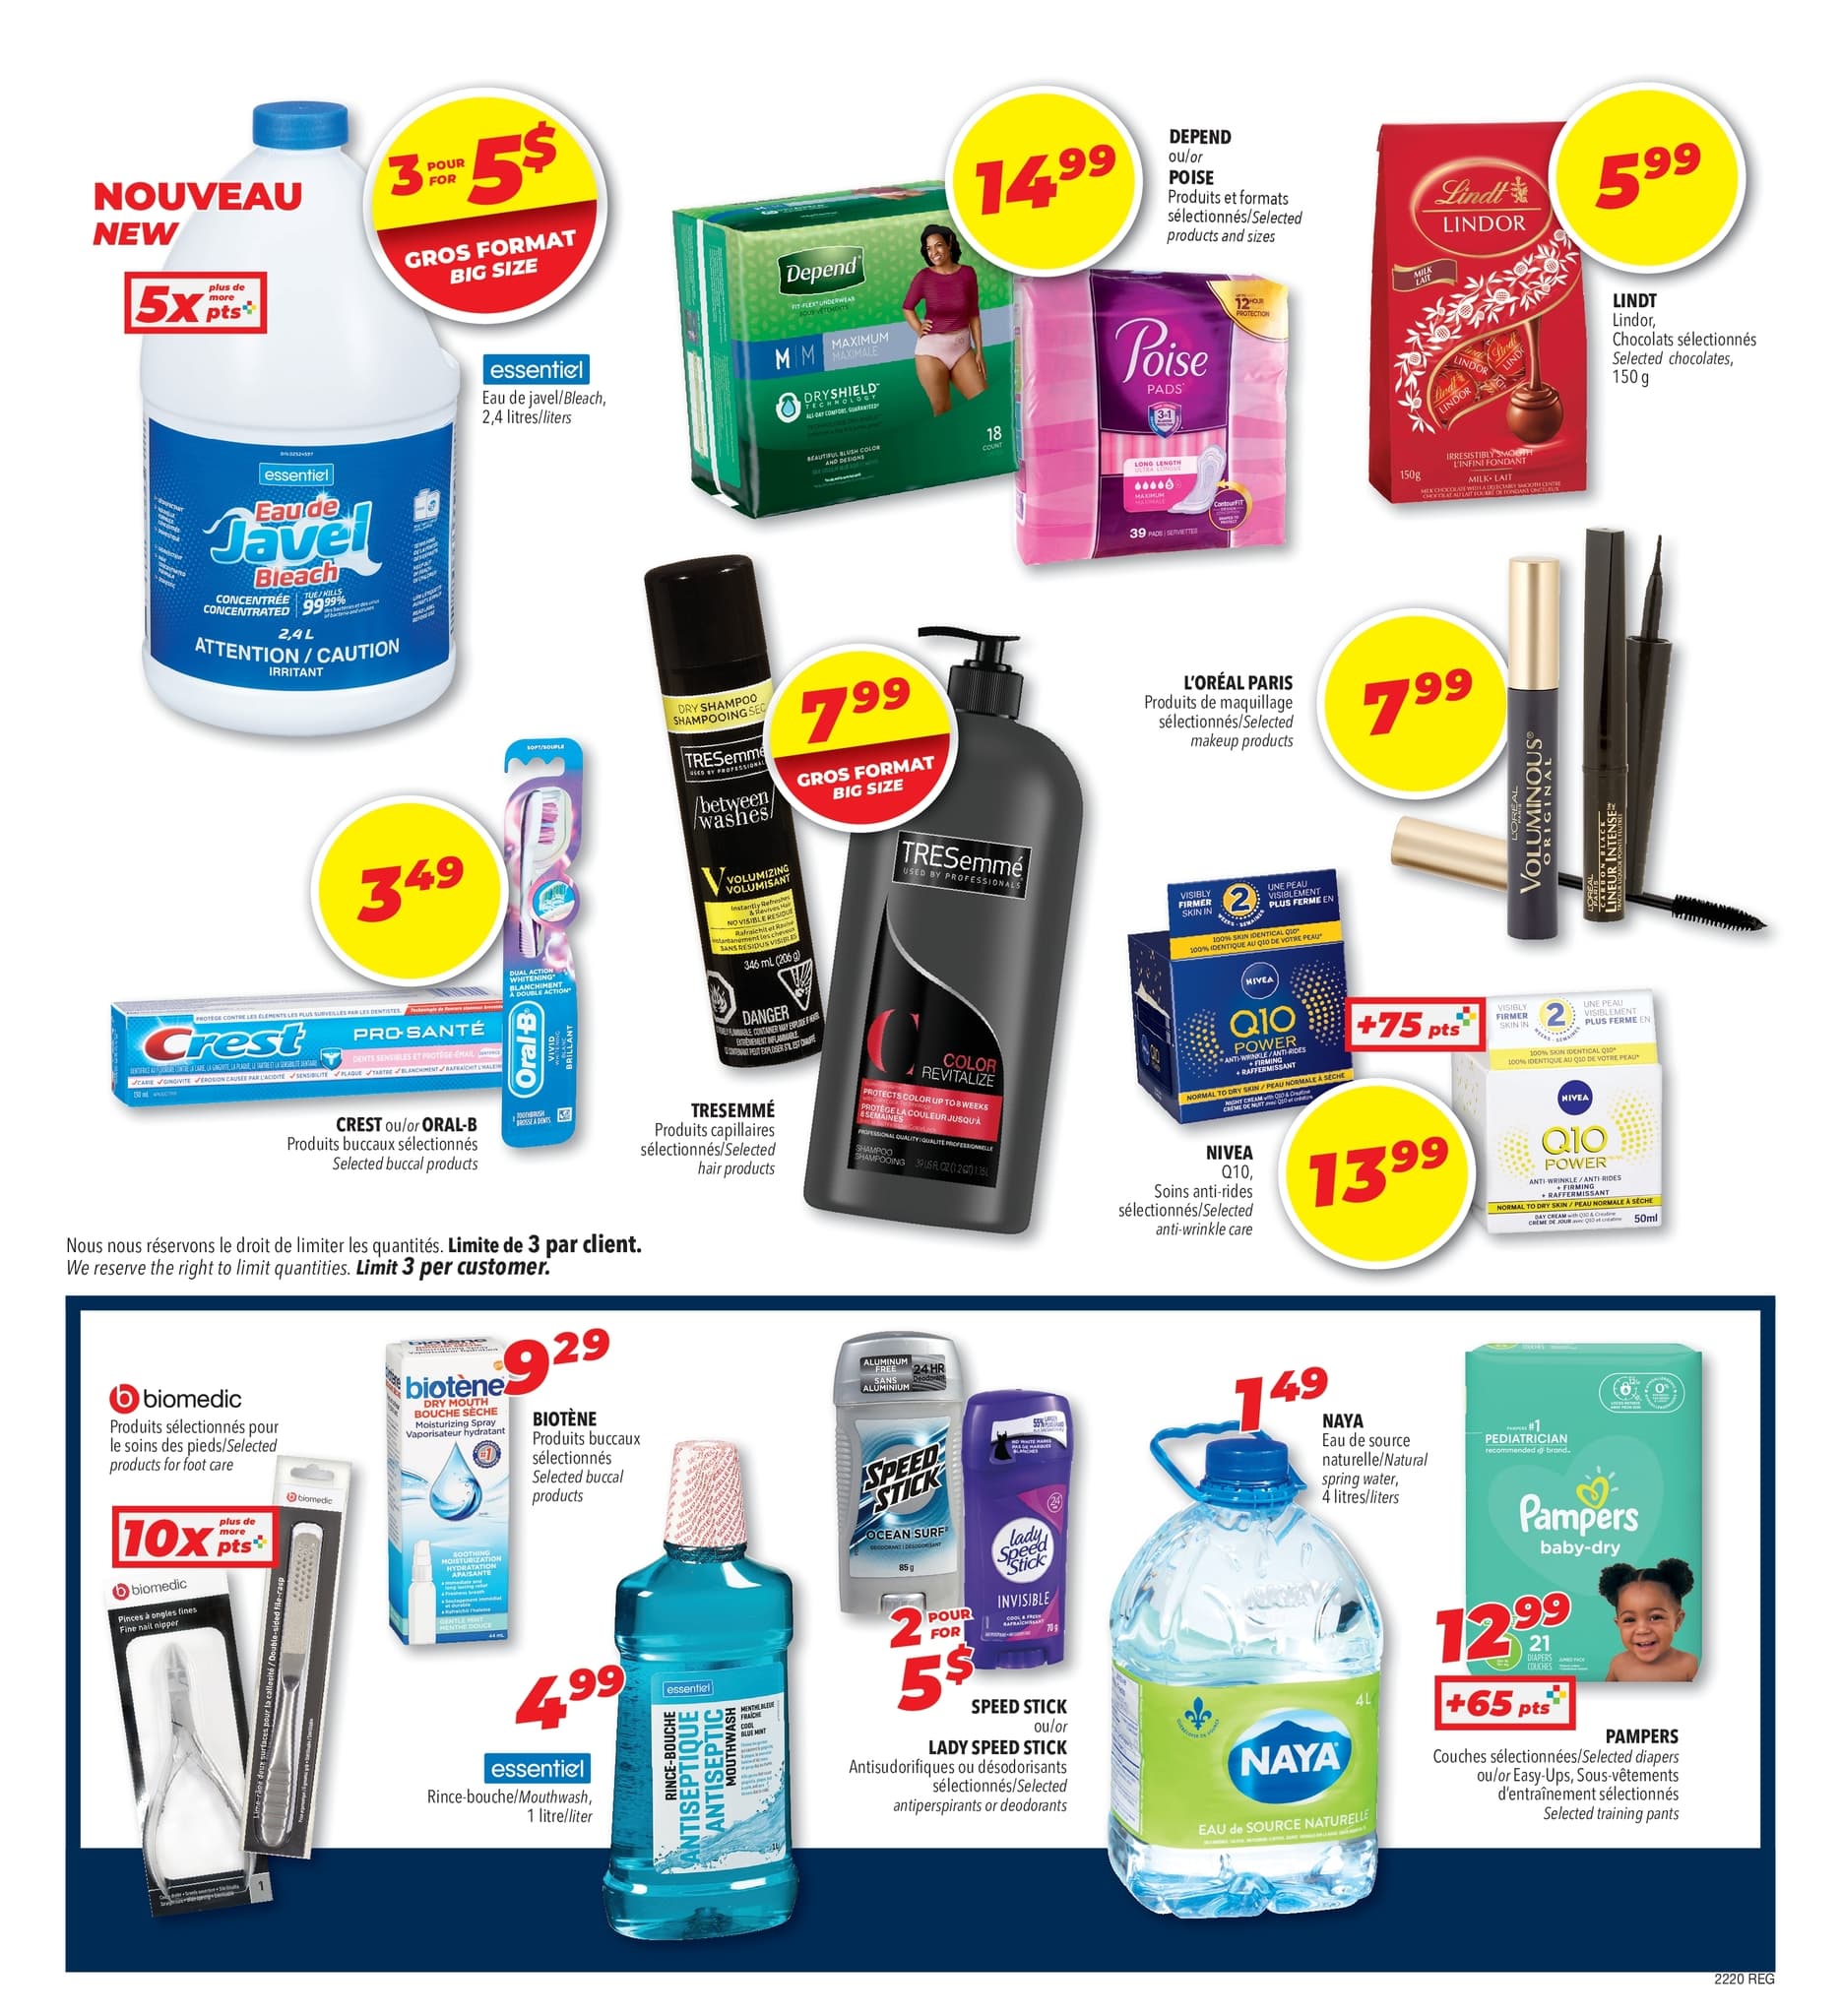 Familiprix - Weekly Flyer Specials - Page 3